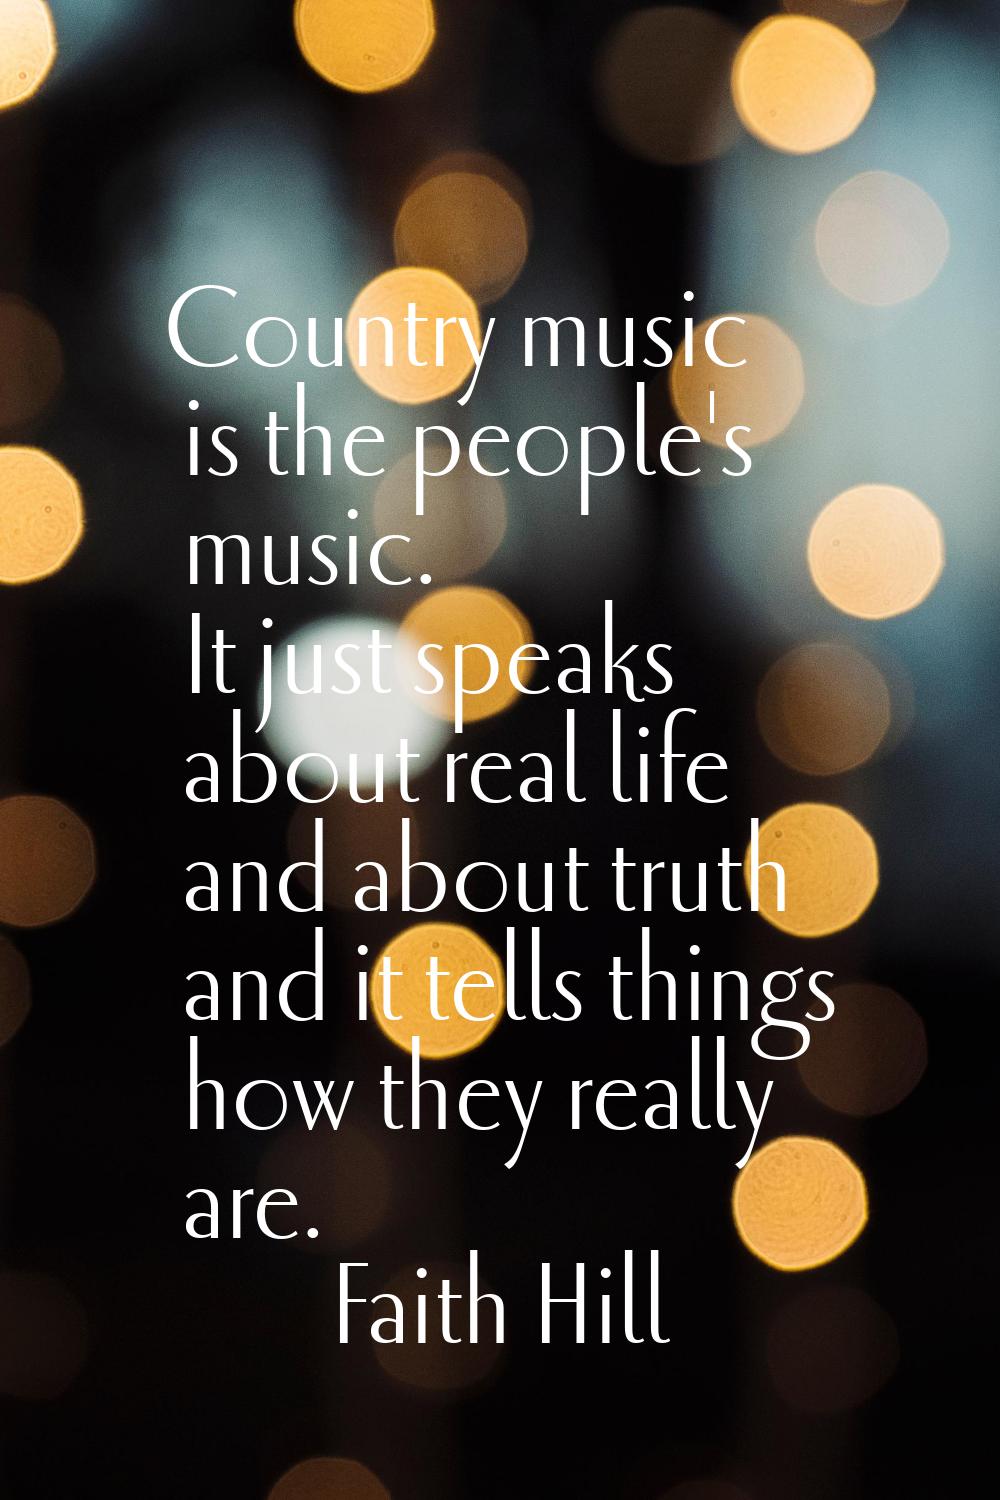 Country music is the people's music. It just speaks about real life and about truth and it tells th